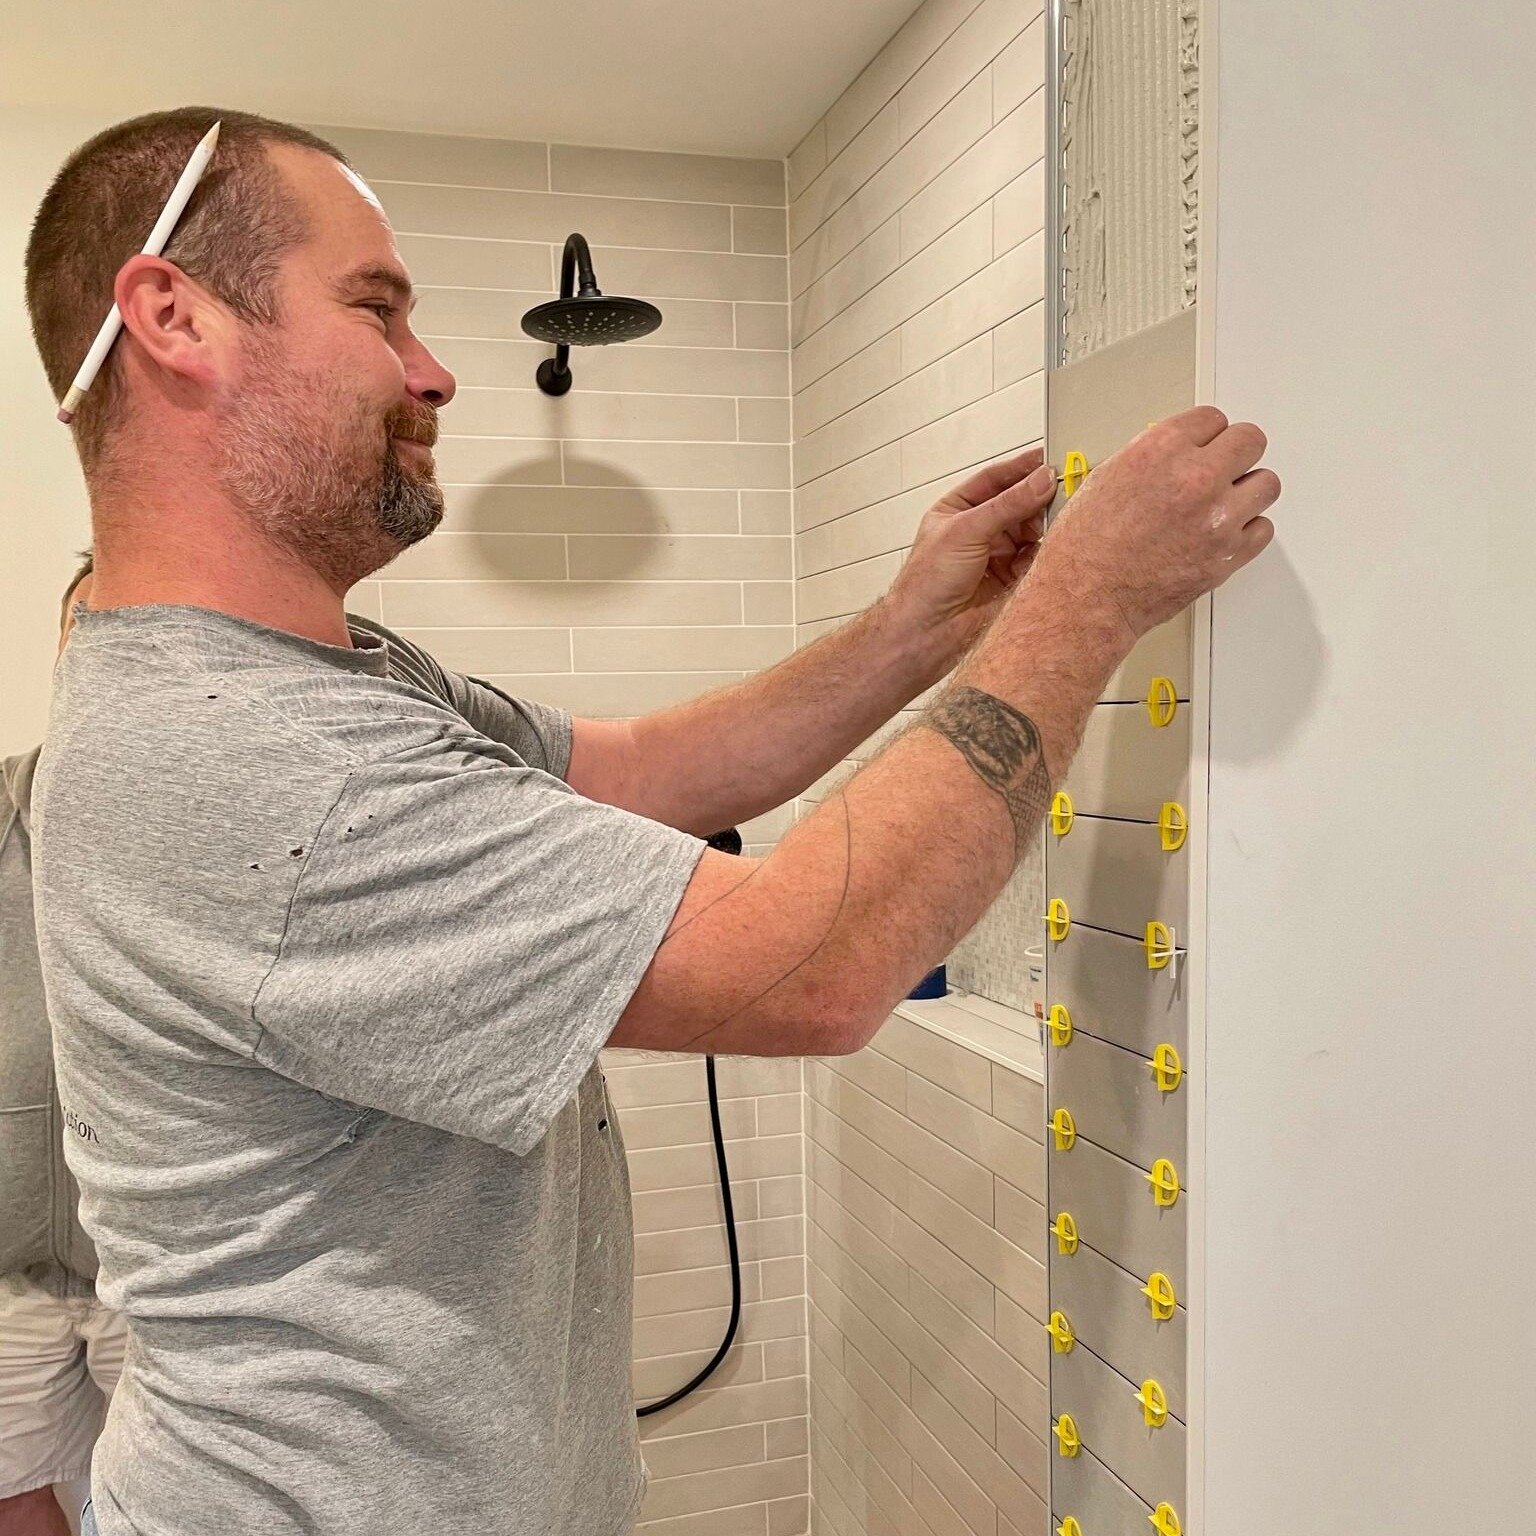 Our team is skilled, knowledgeable, and SUPER nice! If you're planning your next remodel, call 860-434-2004. #teamshaw #lloydsfanclub #welovewhatwedo